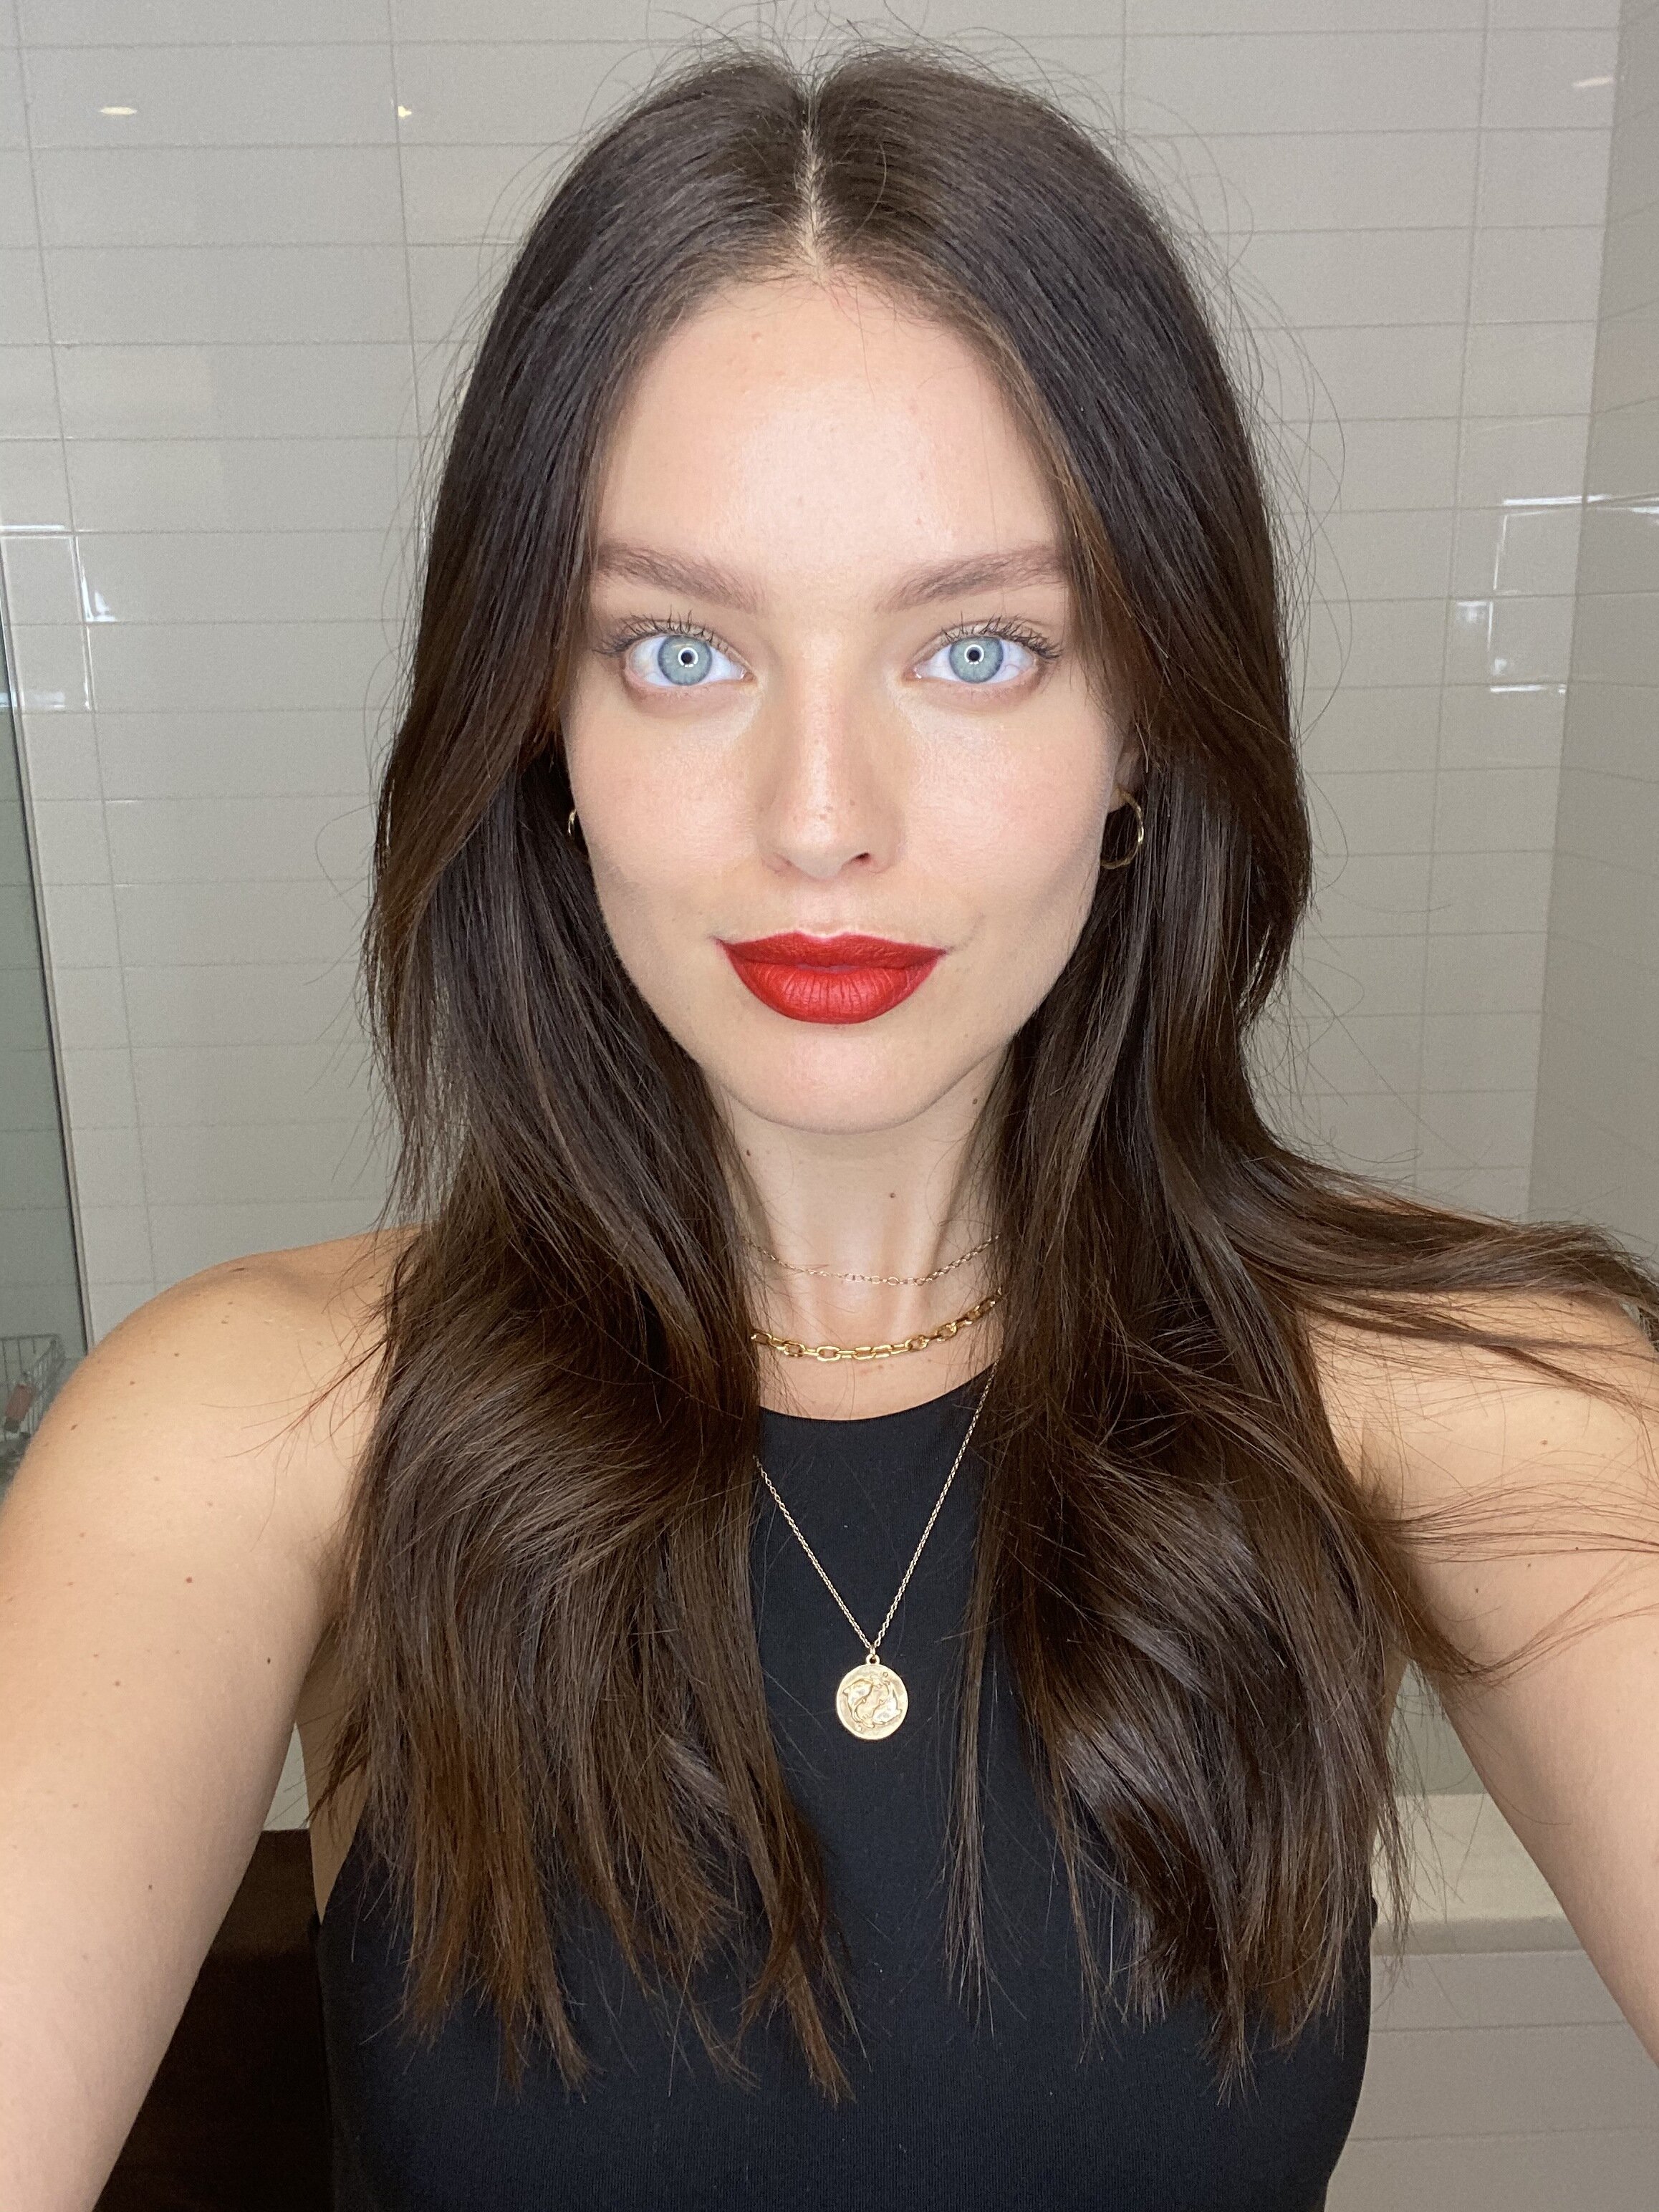 Spekulerer Barbermaskine Udled How To Get The Perfect Red Lip — Emily DiDonato